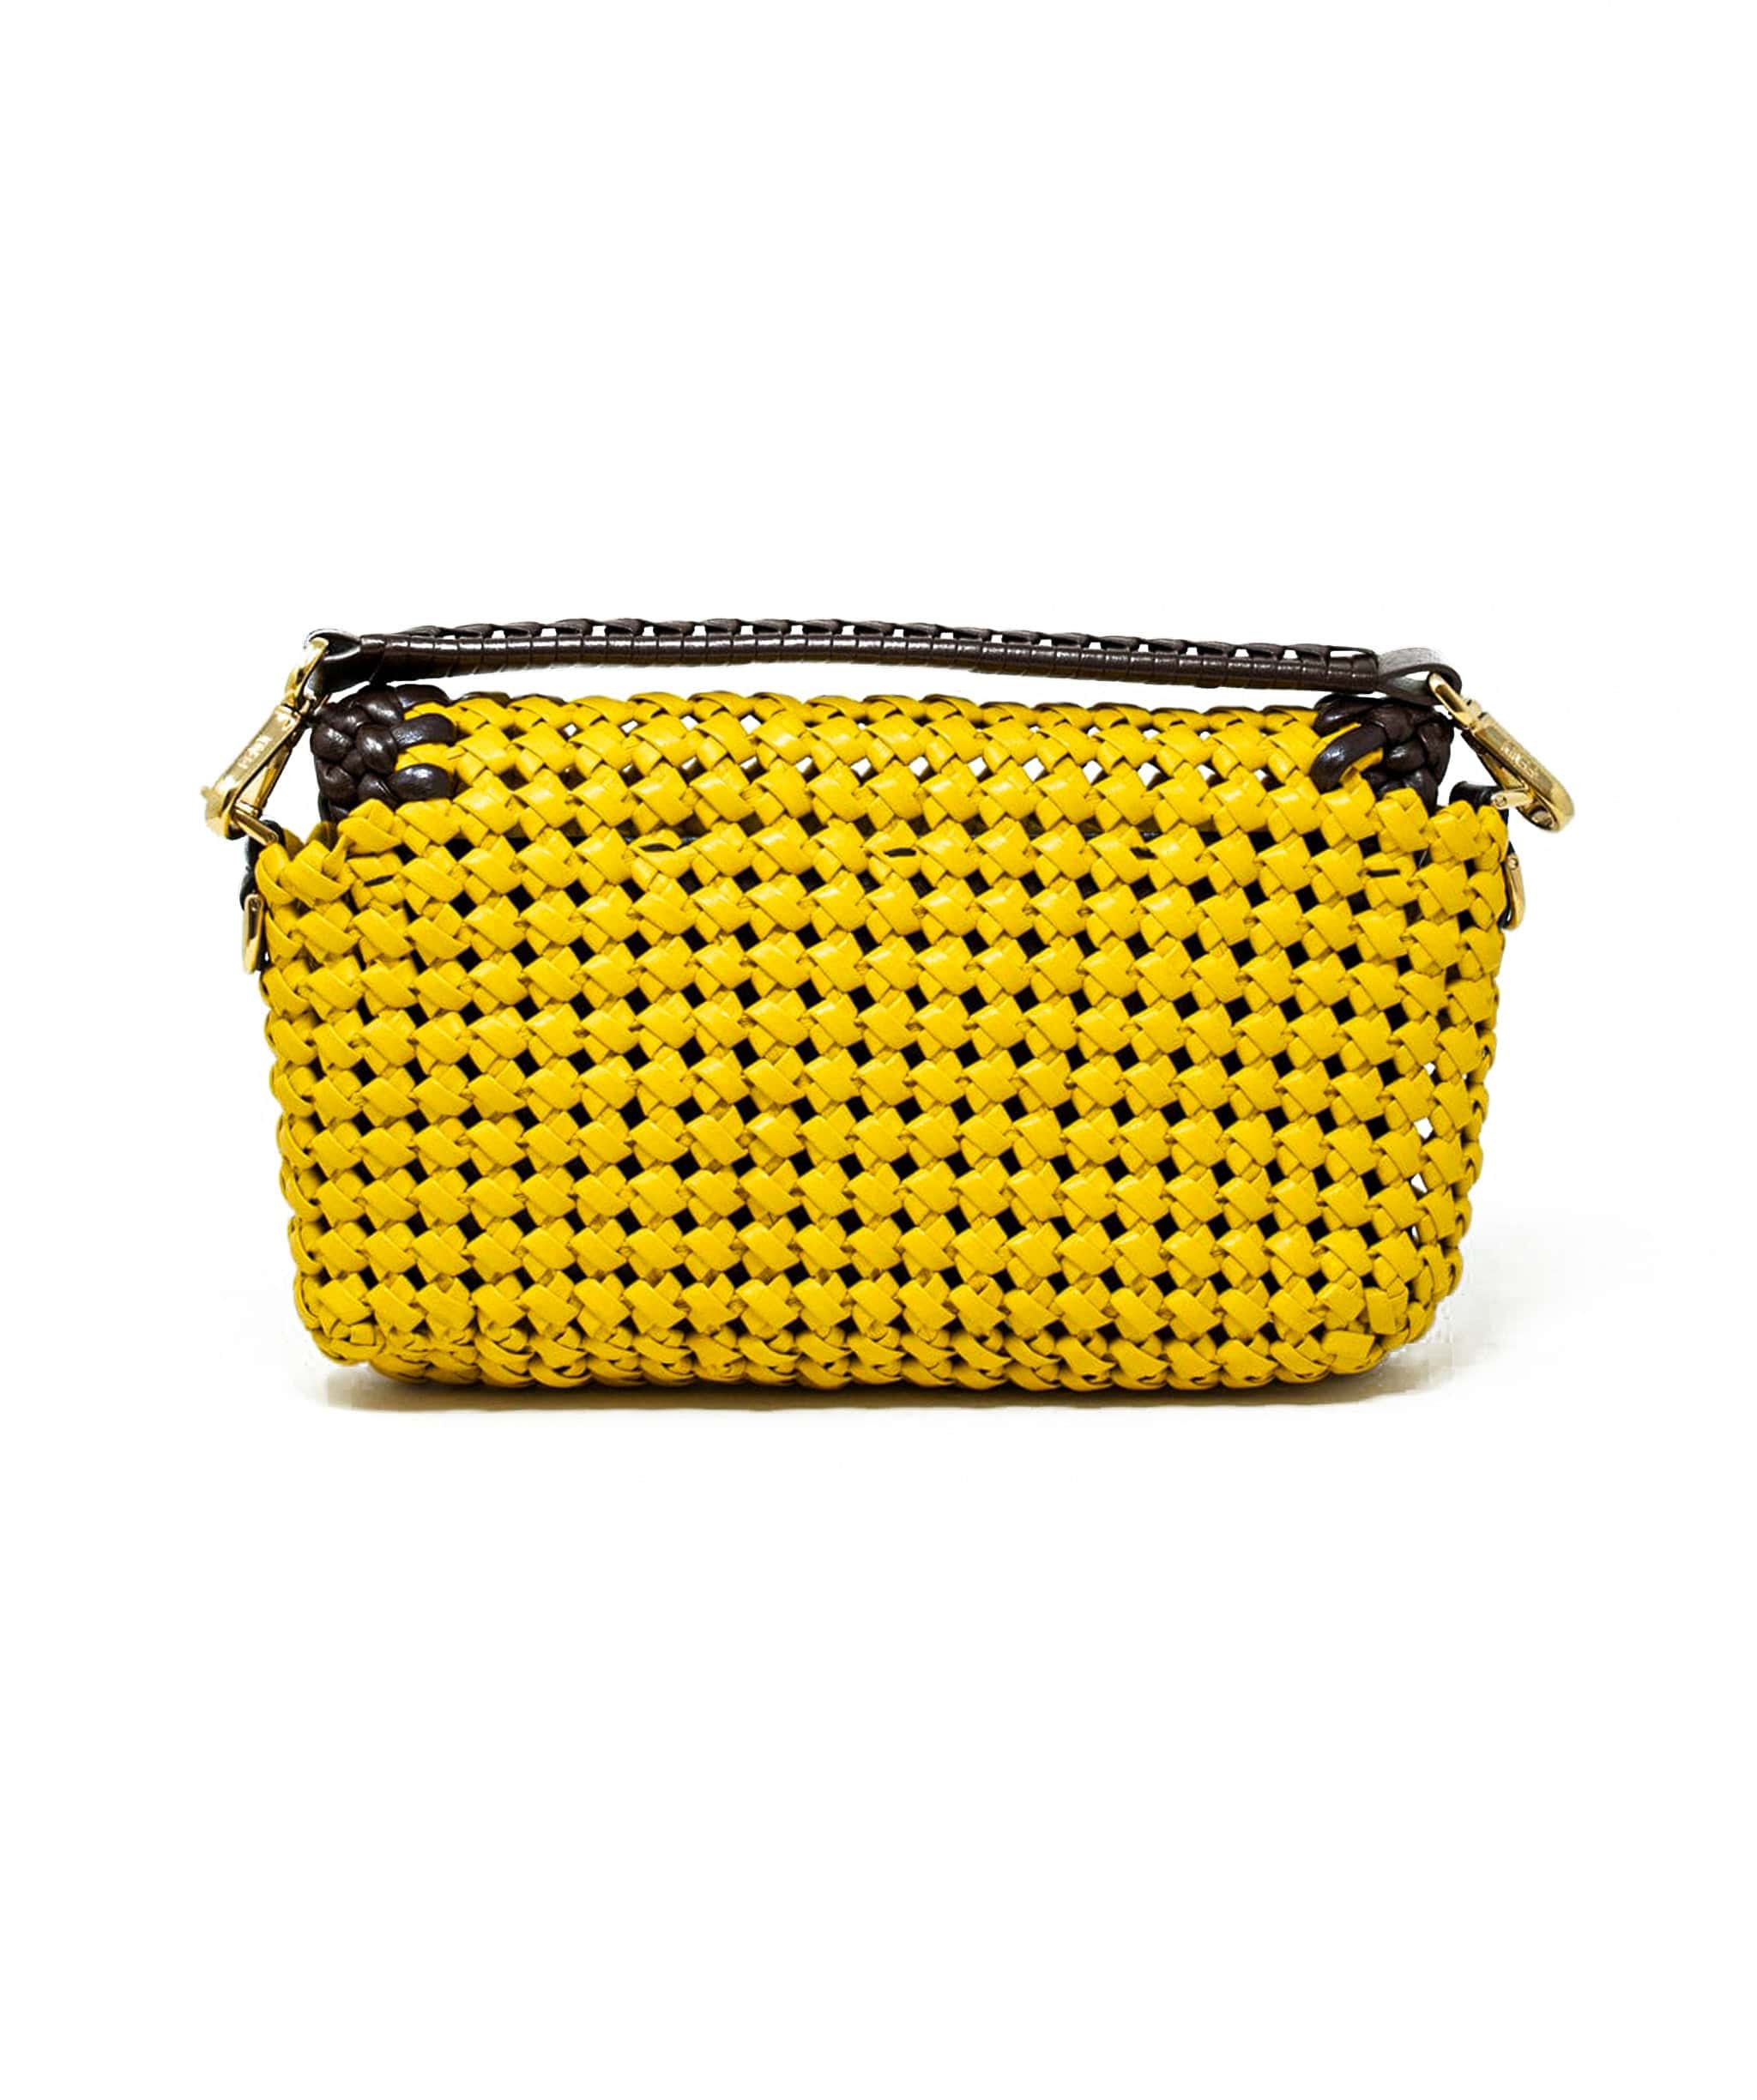 Fendi Fendi Yellow and Brown Woven Leather Baguette Bag - AGL1583